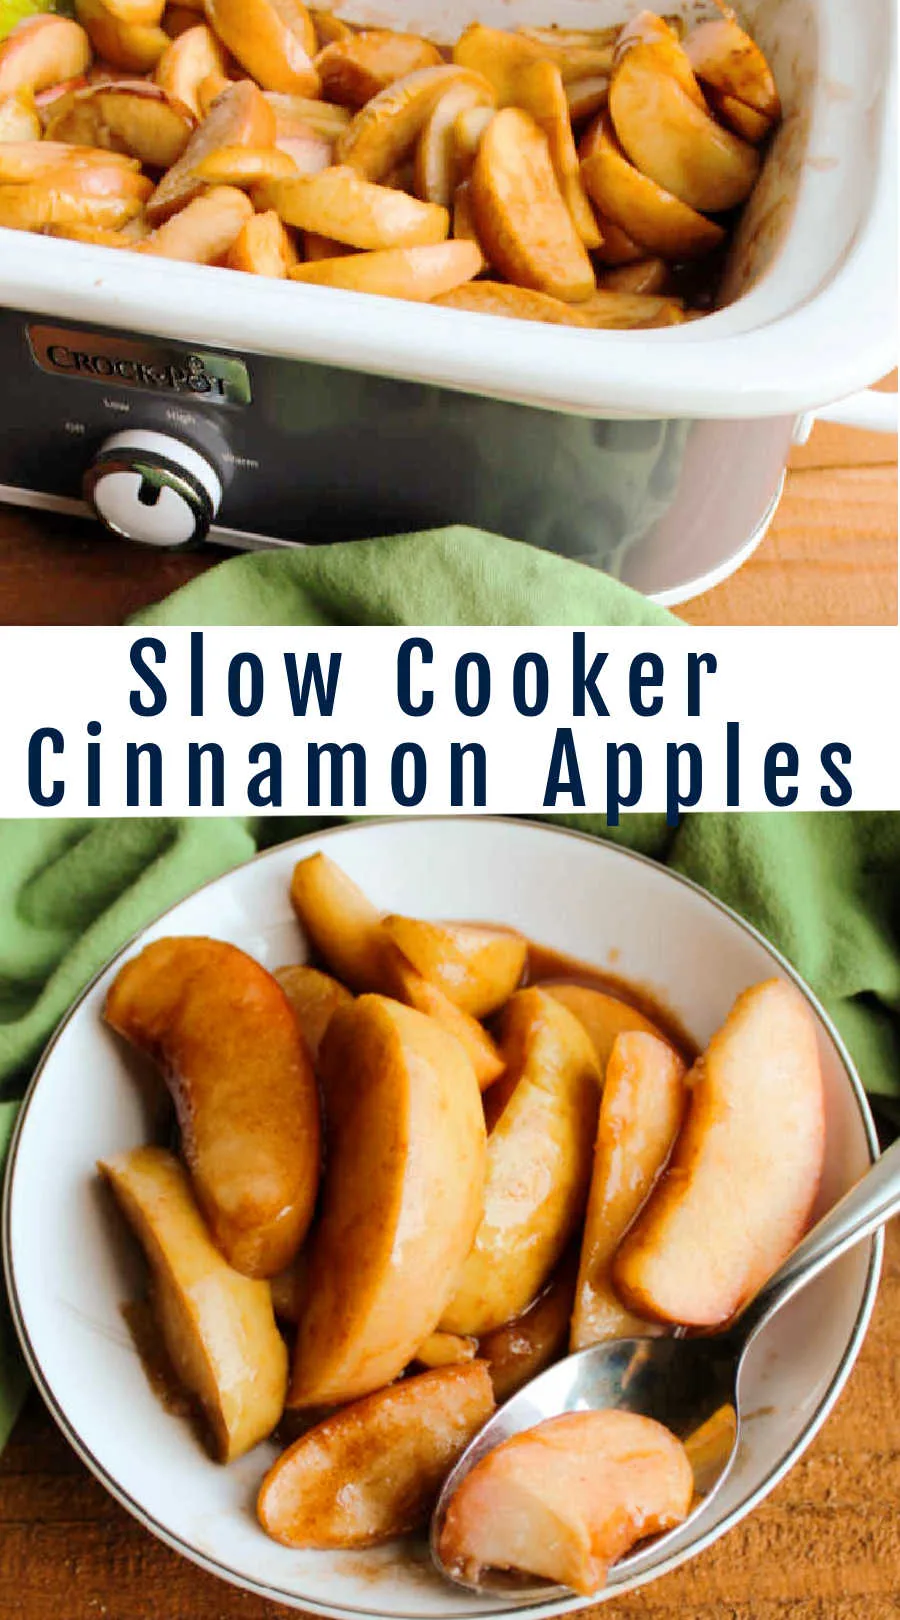 These warm cinnamon spiced apples are made in the slow cooker for a perfect fall side dish. You could also spoon them over ice cream, pancakes, oatmeal and more. Because they are made in a  slow cooker, you basically set it and forget it. They are going to disappear quickly so be sure to make plenty!